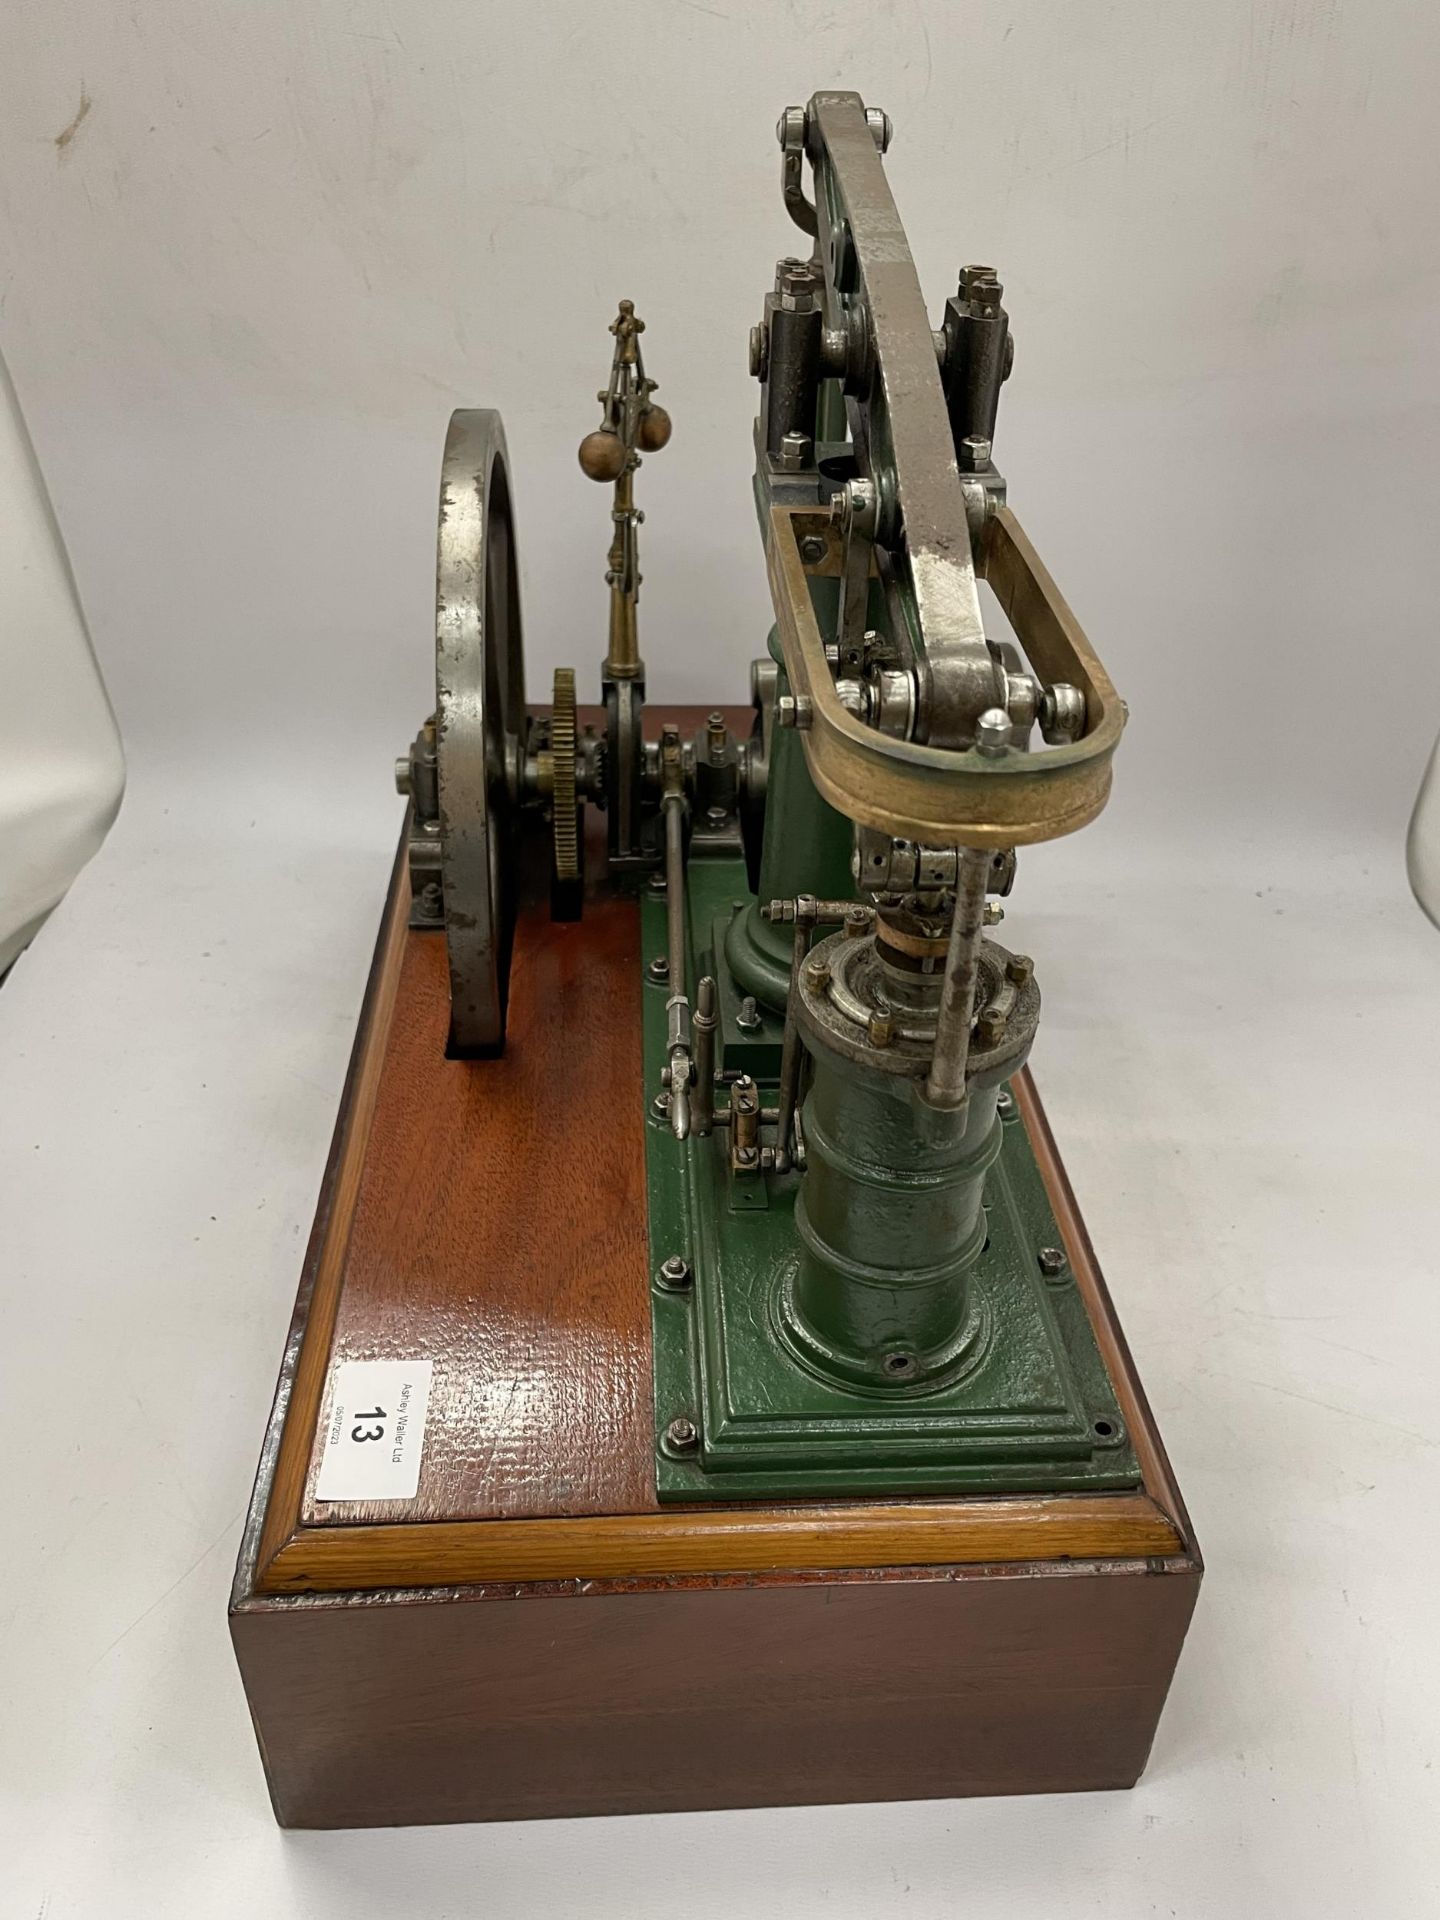 A VINTAGE STATIONARY STEAM ENGINE WHICH CAN RUN OFF COMPRESSED AIR OR STEAM - Image 5 of 6